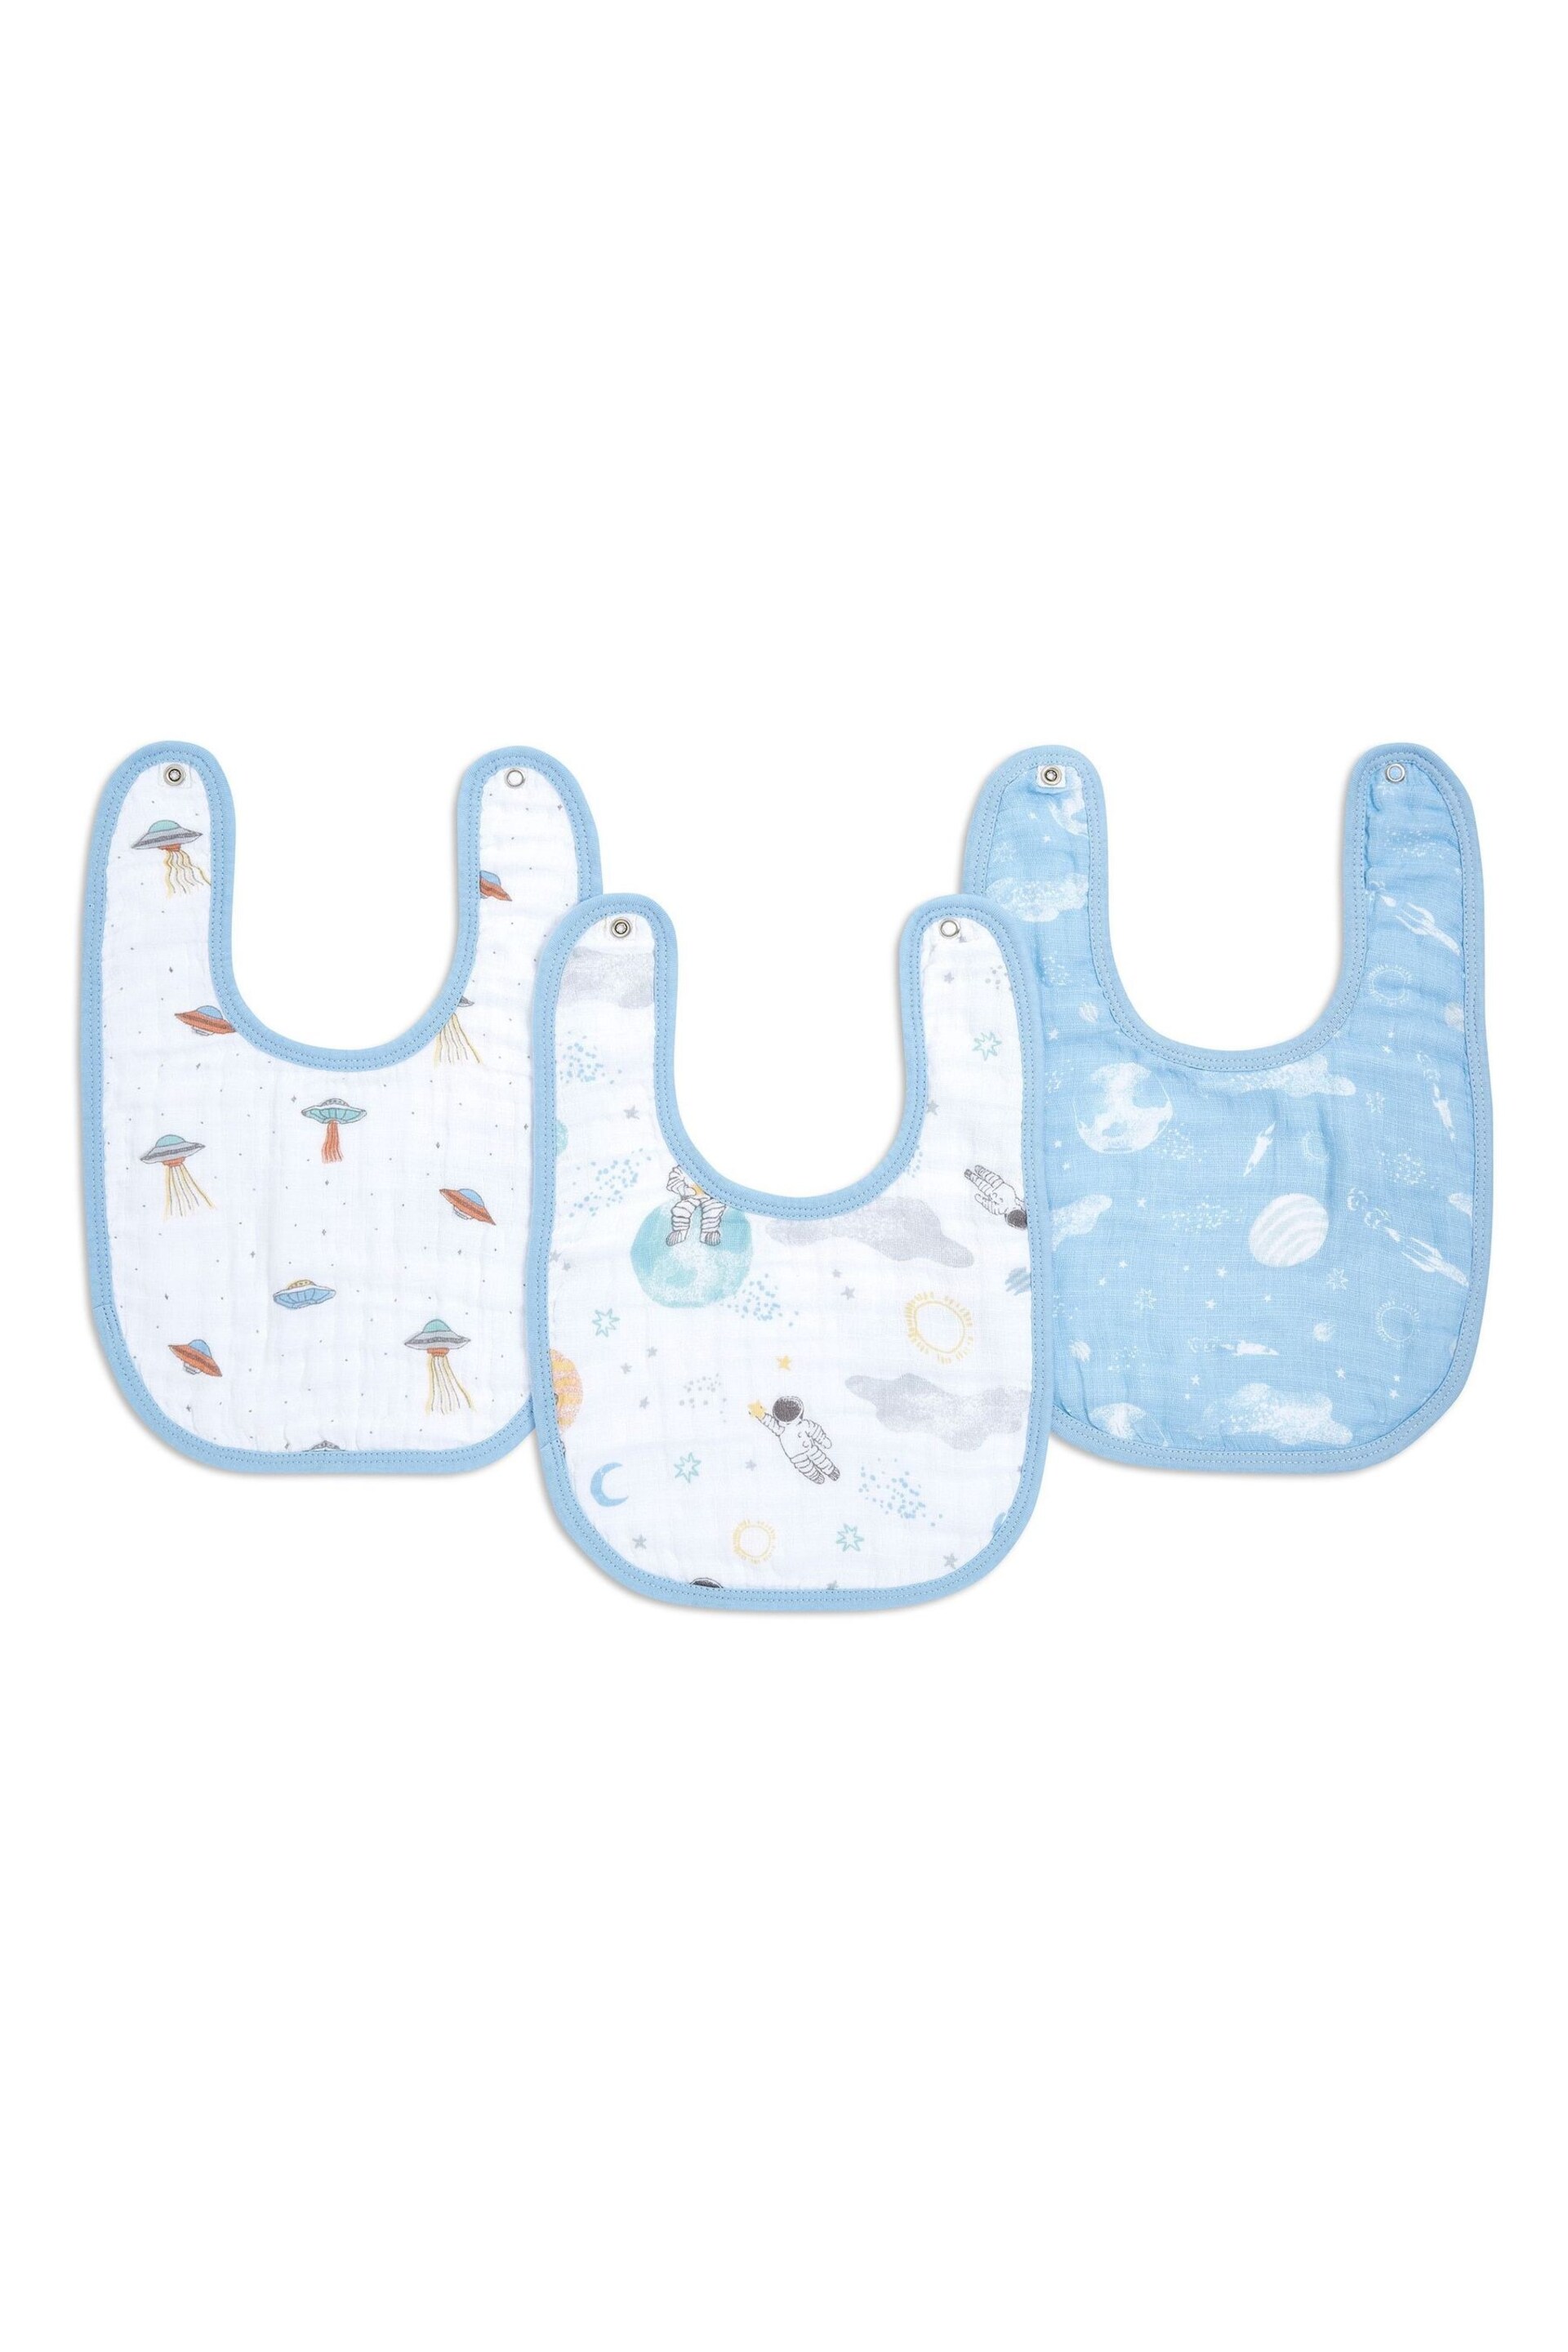 aden + anais™ Natural Essentials Space Explorers Cotton Muslin Baby Snap Bibs 3 Pack - Image 1 of 3